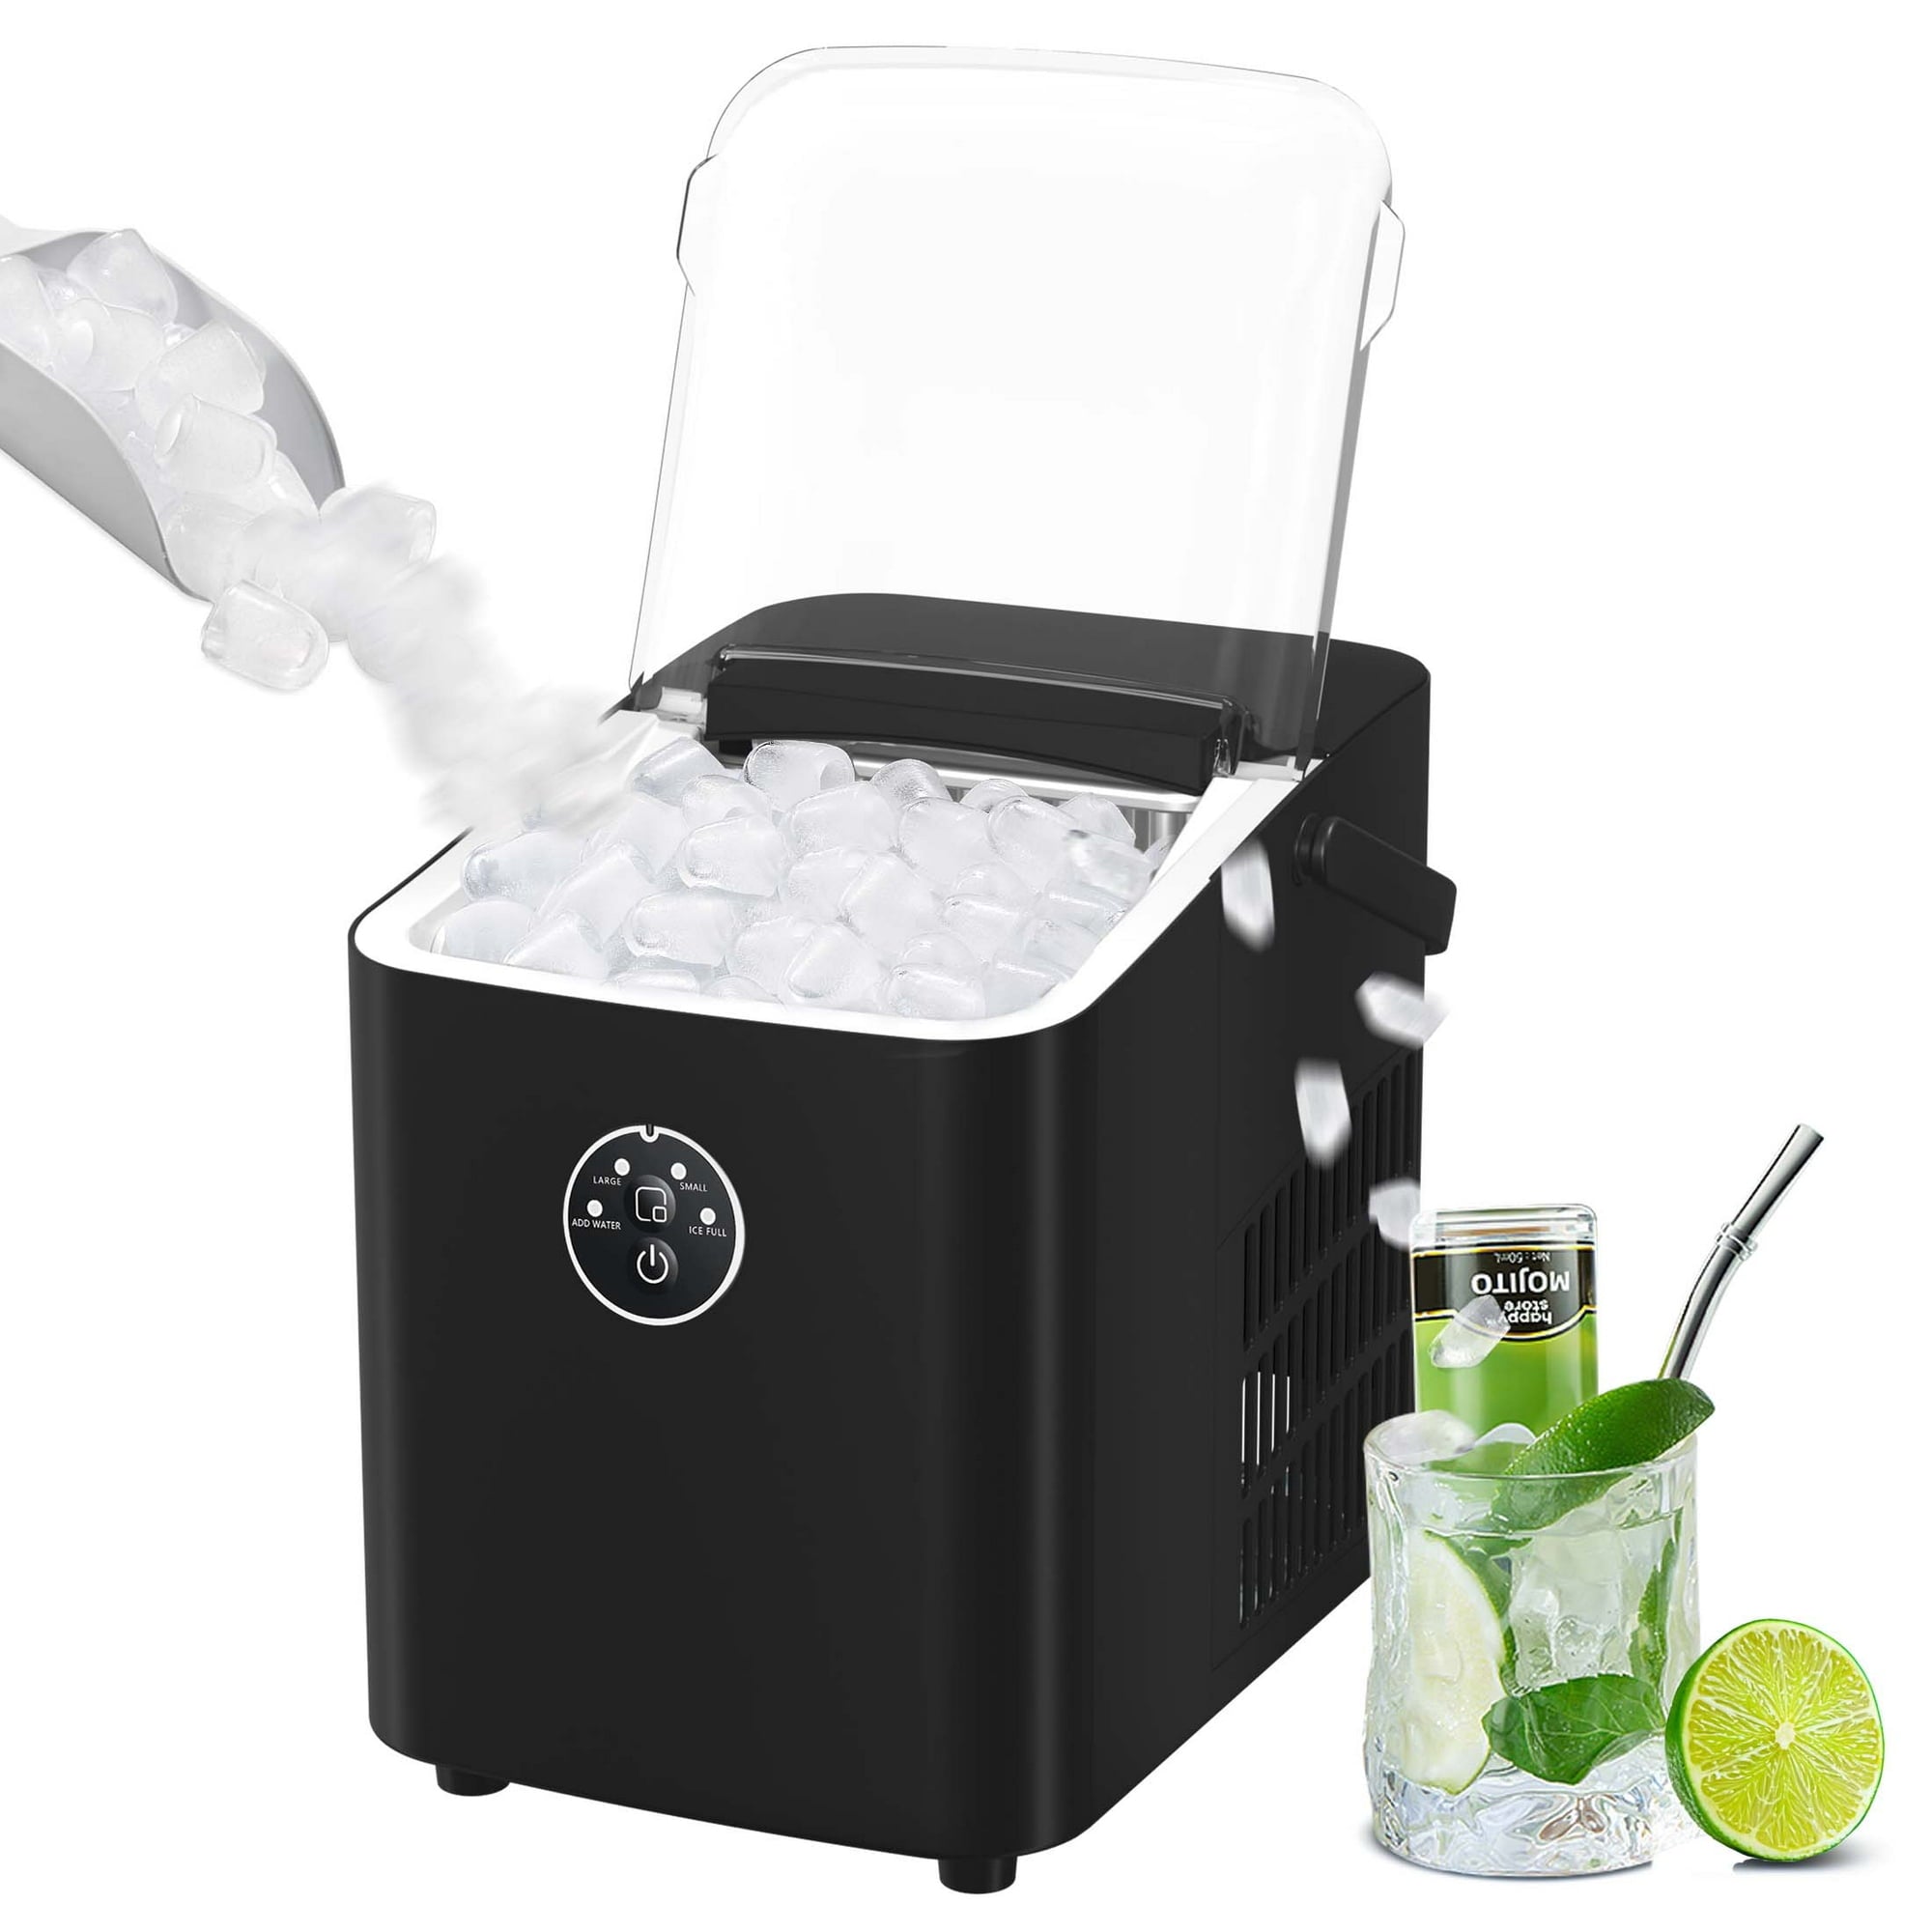 Lhriver Nugget Ice Maker Countertop, 33Lbs/24H with Self-Cleaning Function, Portable Sonic Ice Machine for Home/Office/Party-White